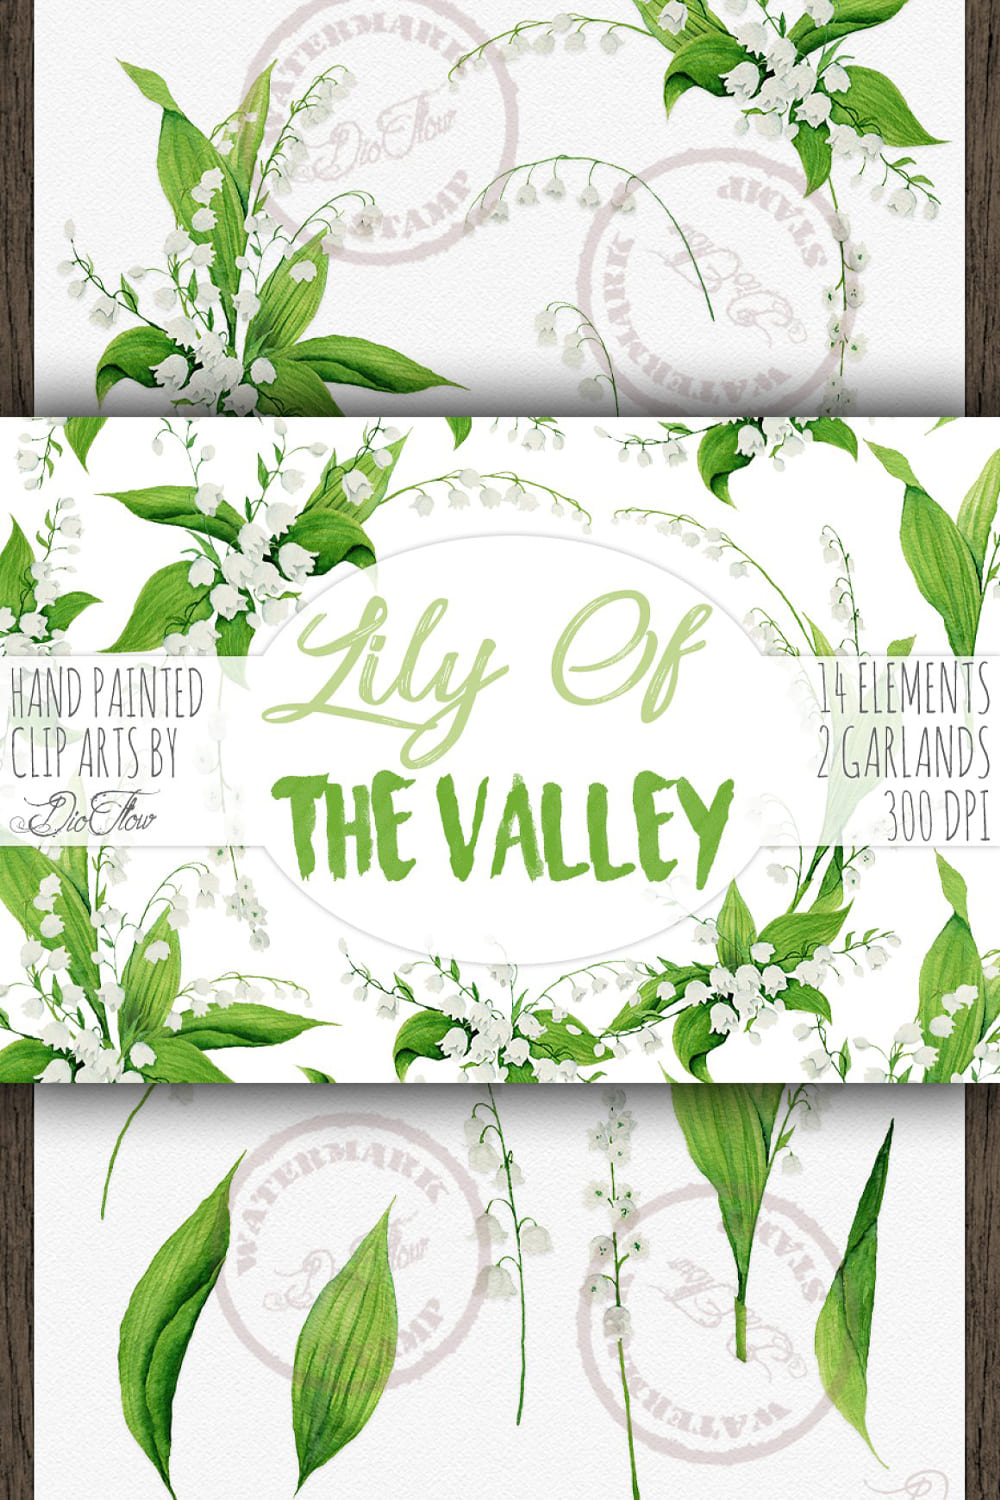 2203183 lily of the valley clip art pinterest 1000 1500